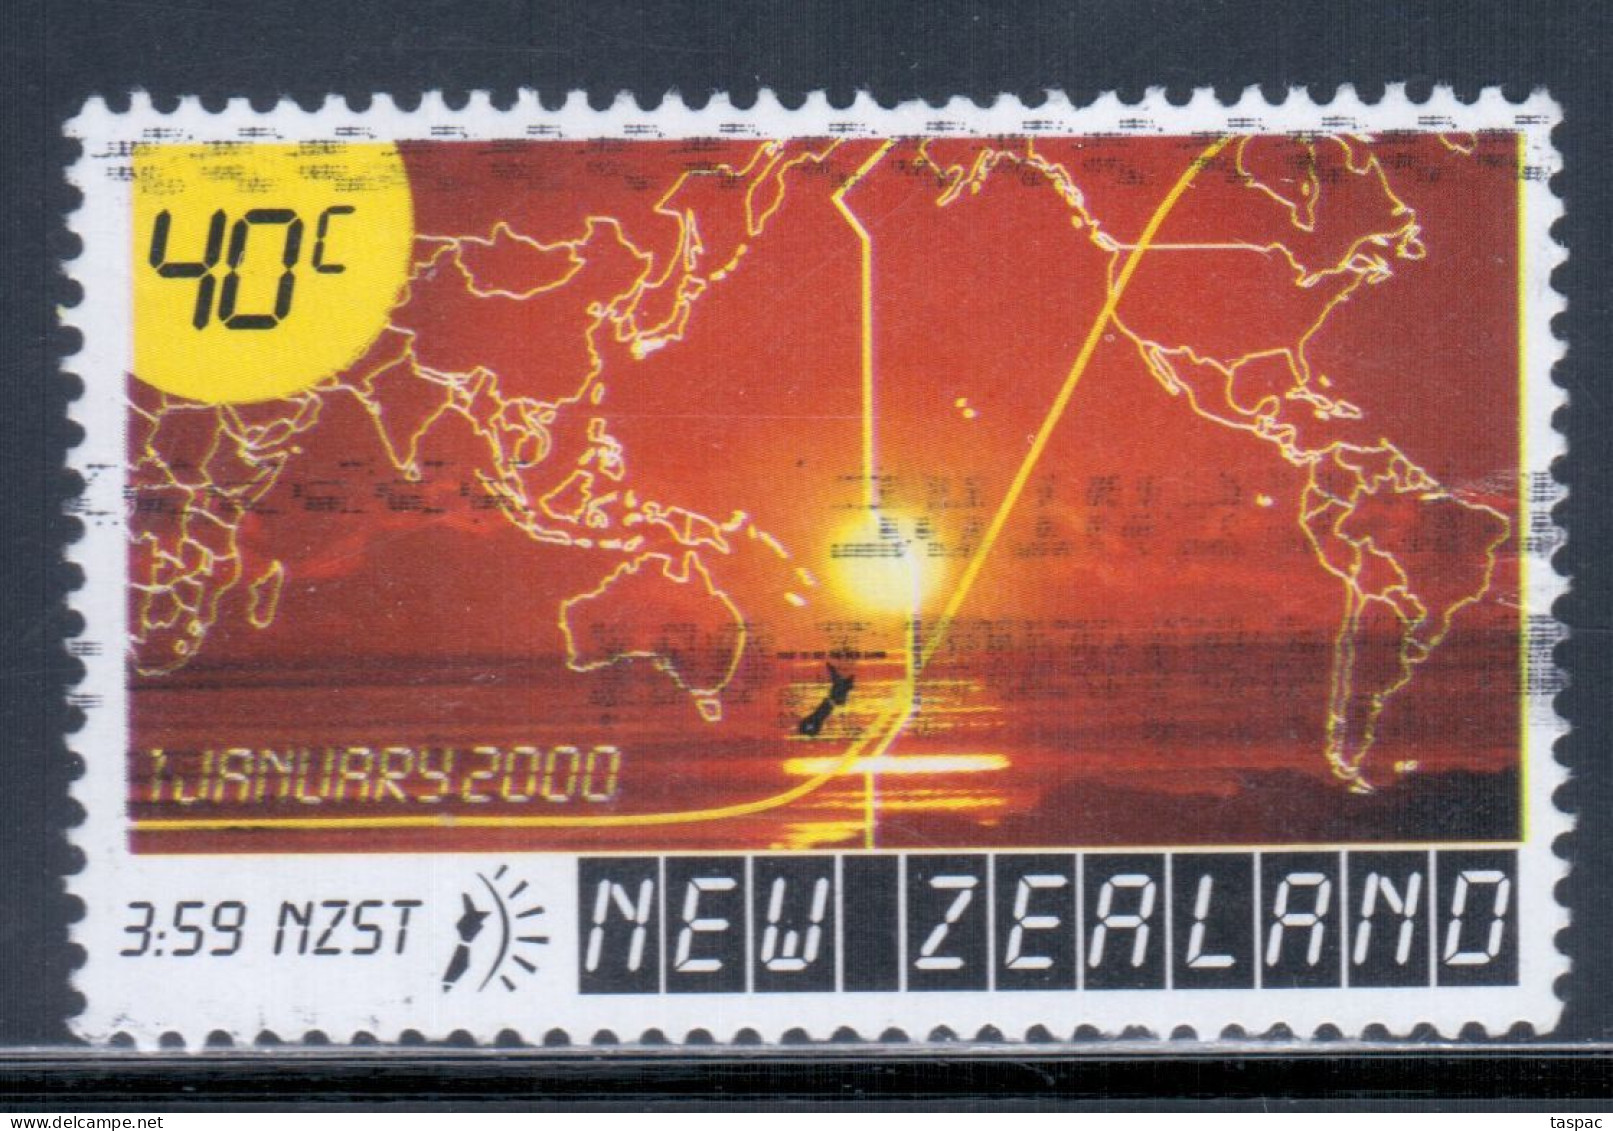 New Zealand 2000 Mi# 1813 Used - First Sunrise Of The New Millennium / Space - Oceanía